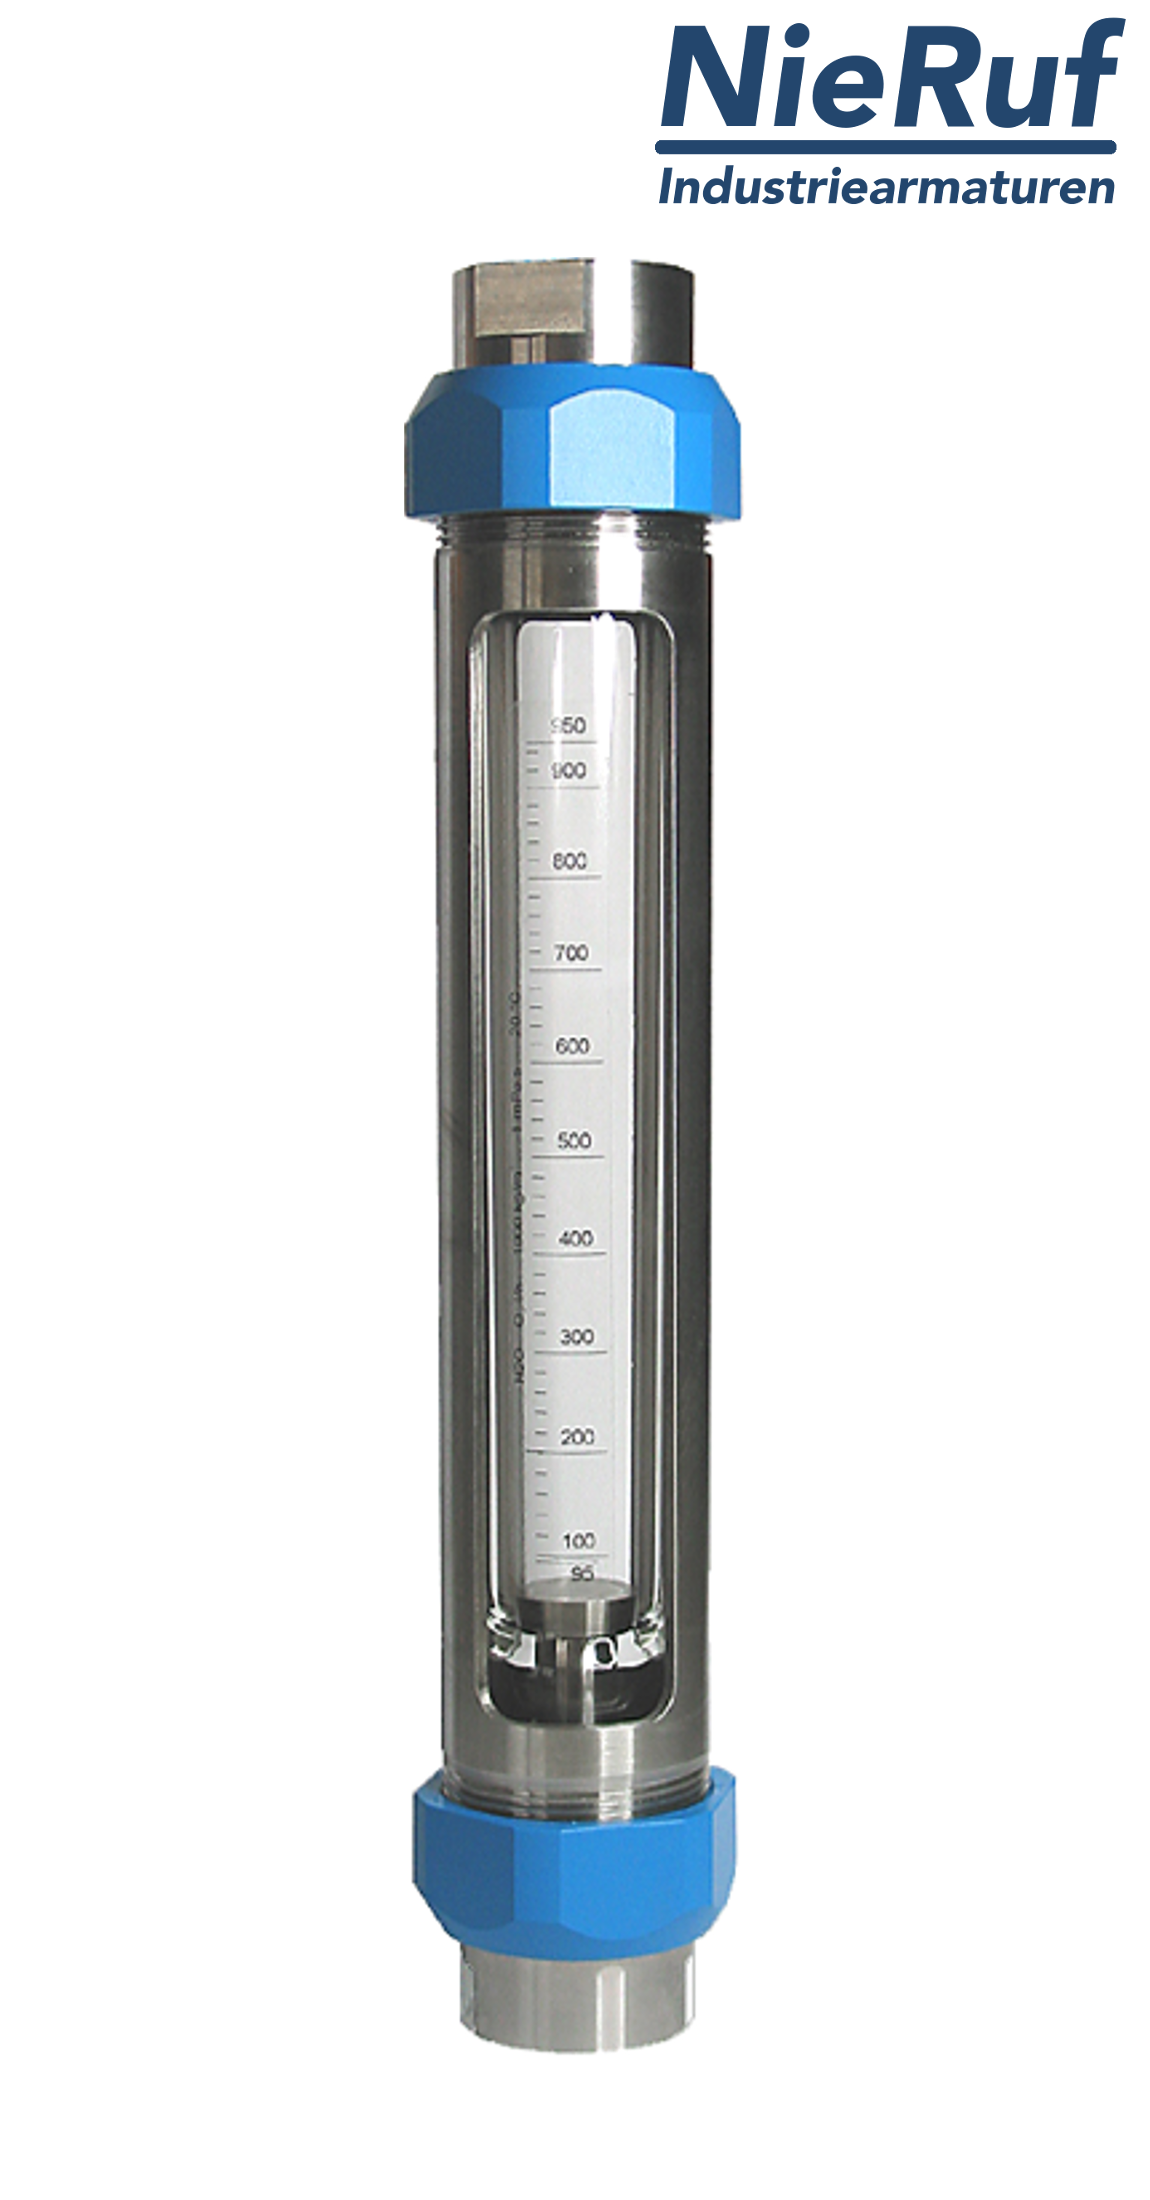 Variable area flowmeter stainless steel + borosilicate 1 1/2" inch 6000.0 - 20000 l/h water FKM